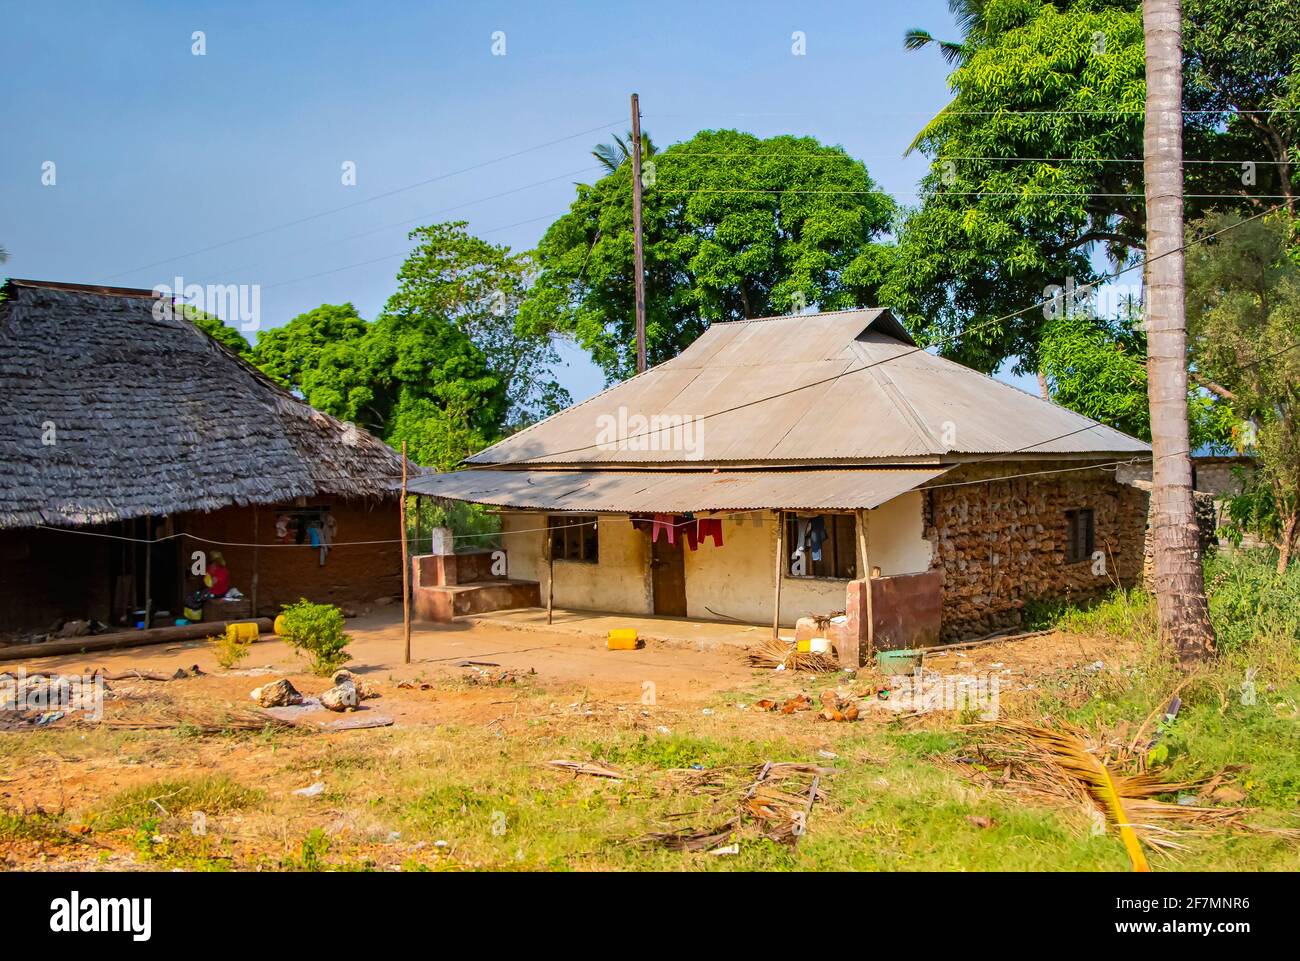 Typical stone houses in an African village on the road to Mombasa. It is a small village in Kenya. Stock Photo